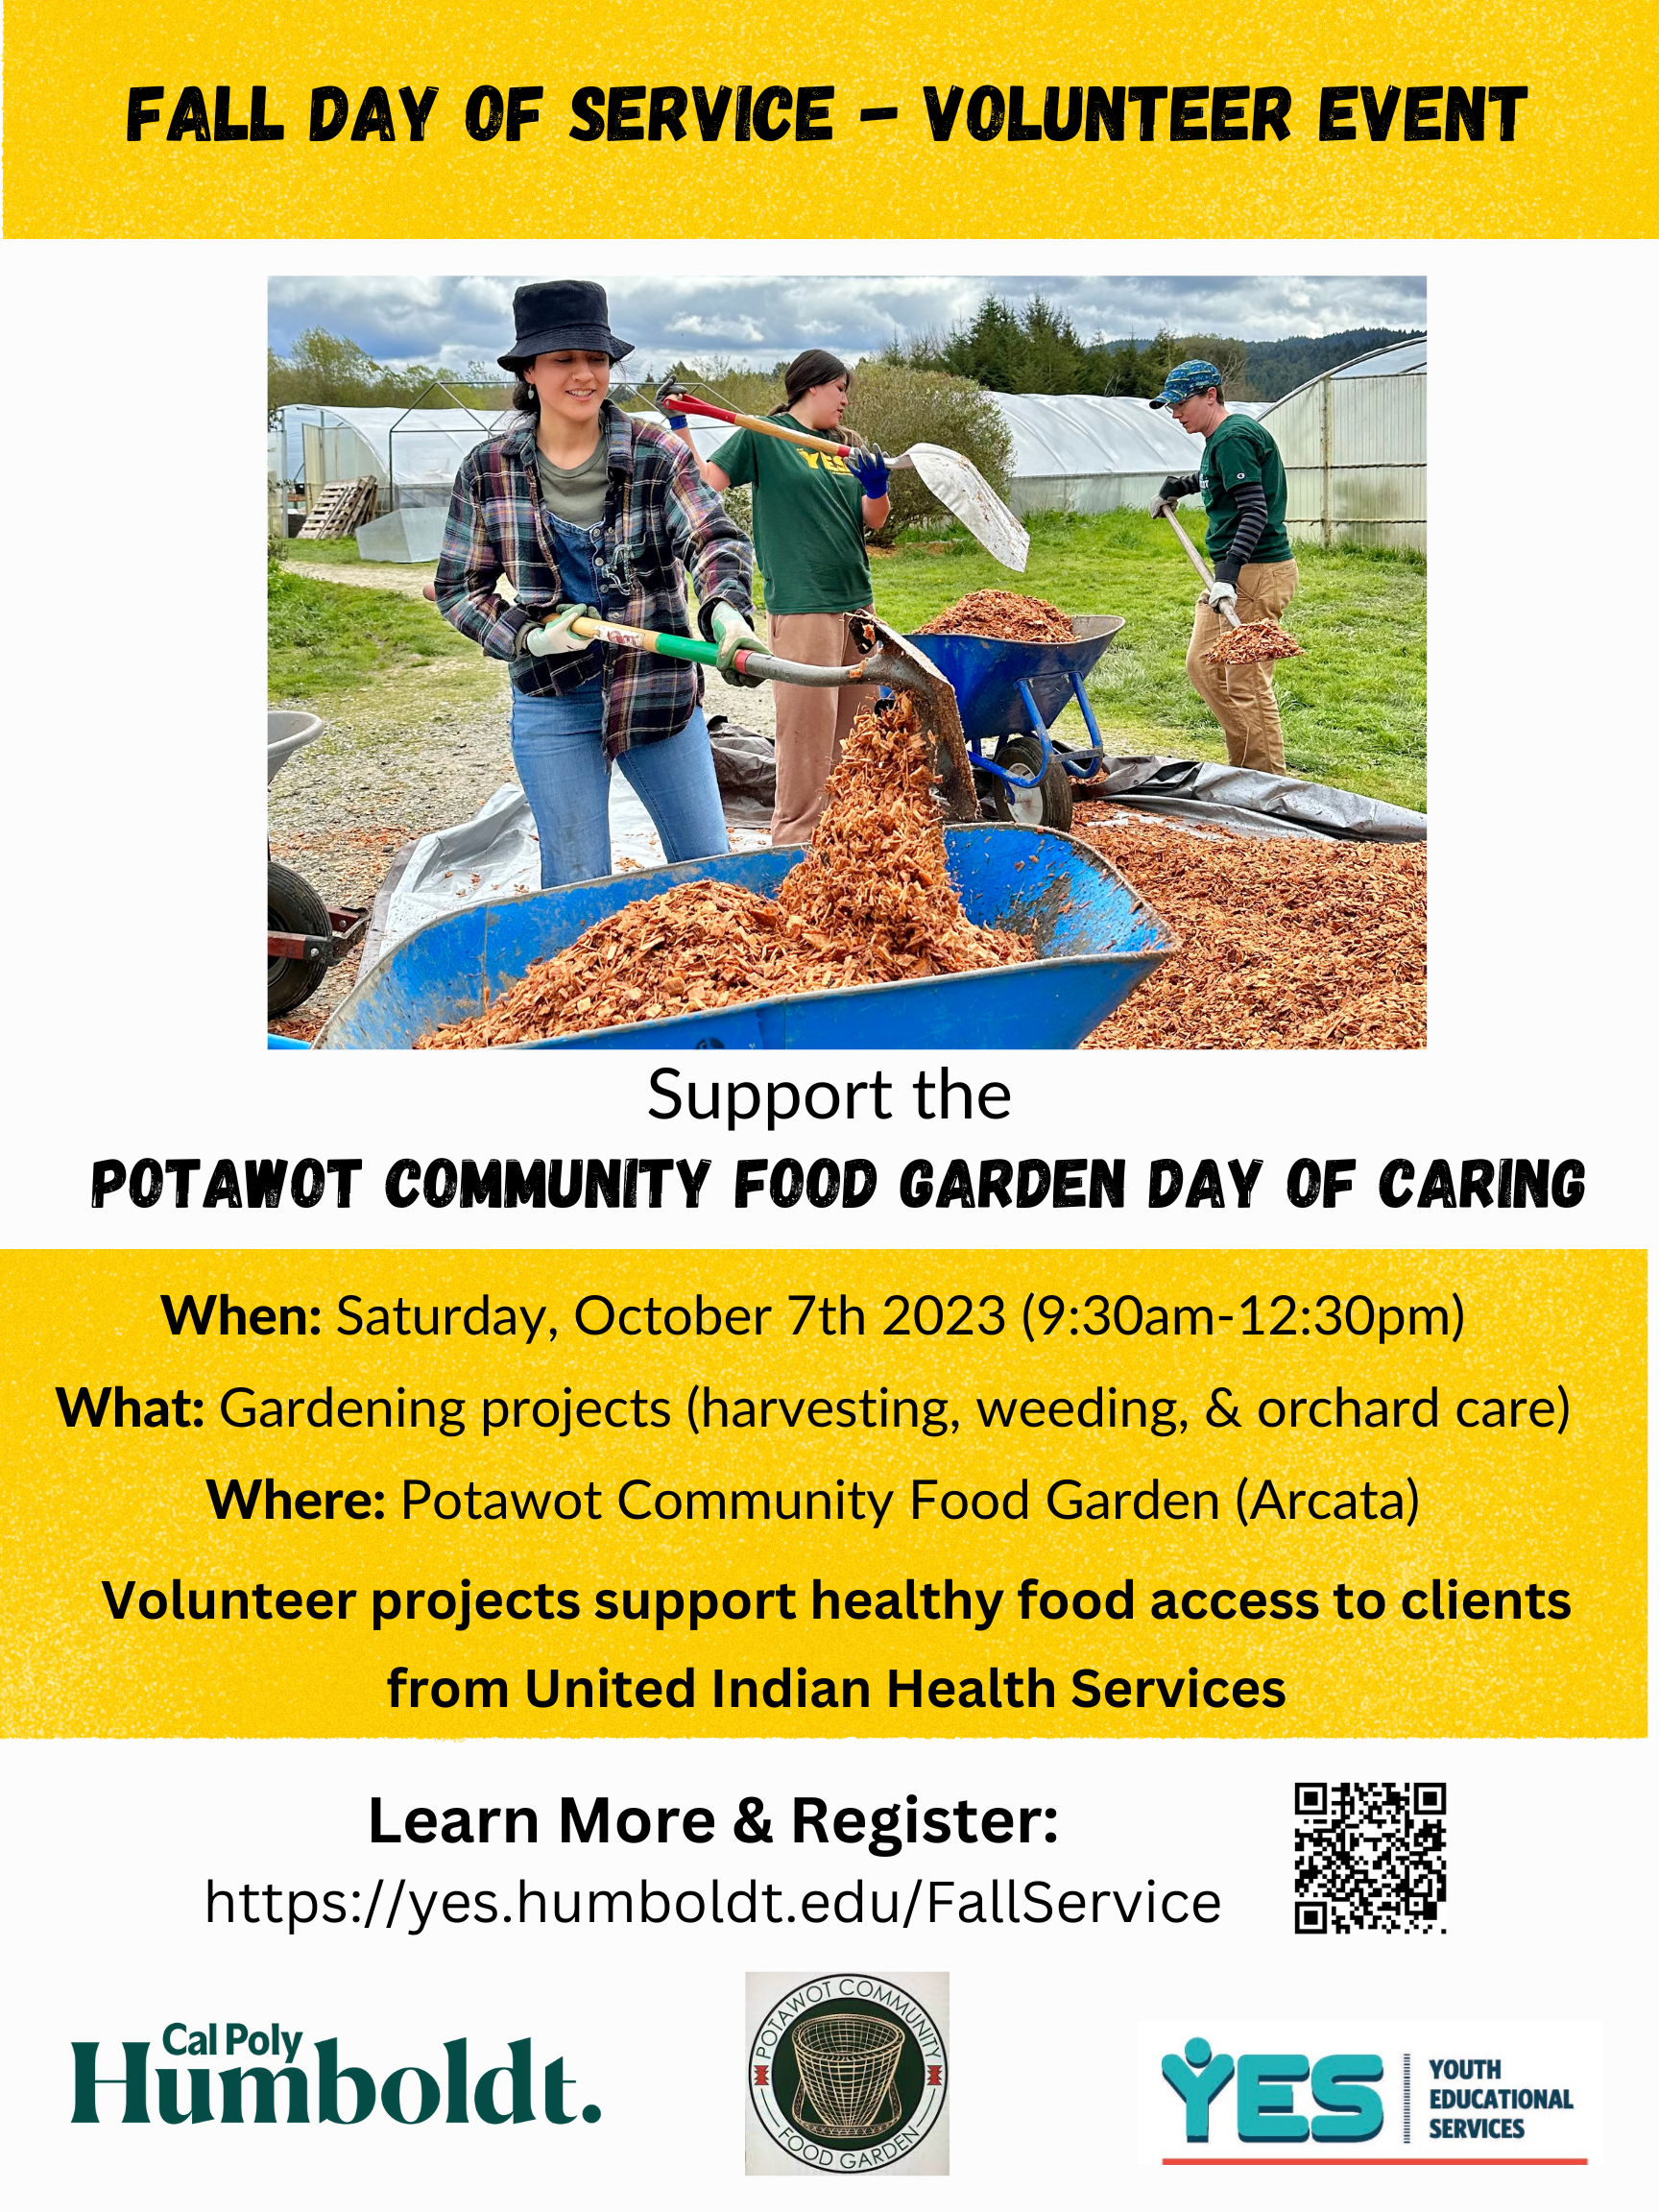 Fall Day of Service Volunteer Event. Support the Potawot Community Food Garden DAY OF CARING. 